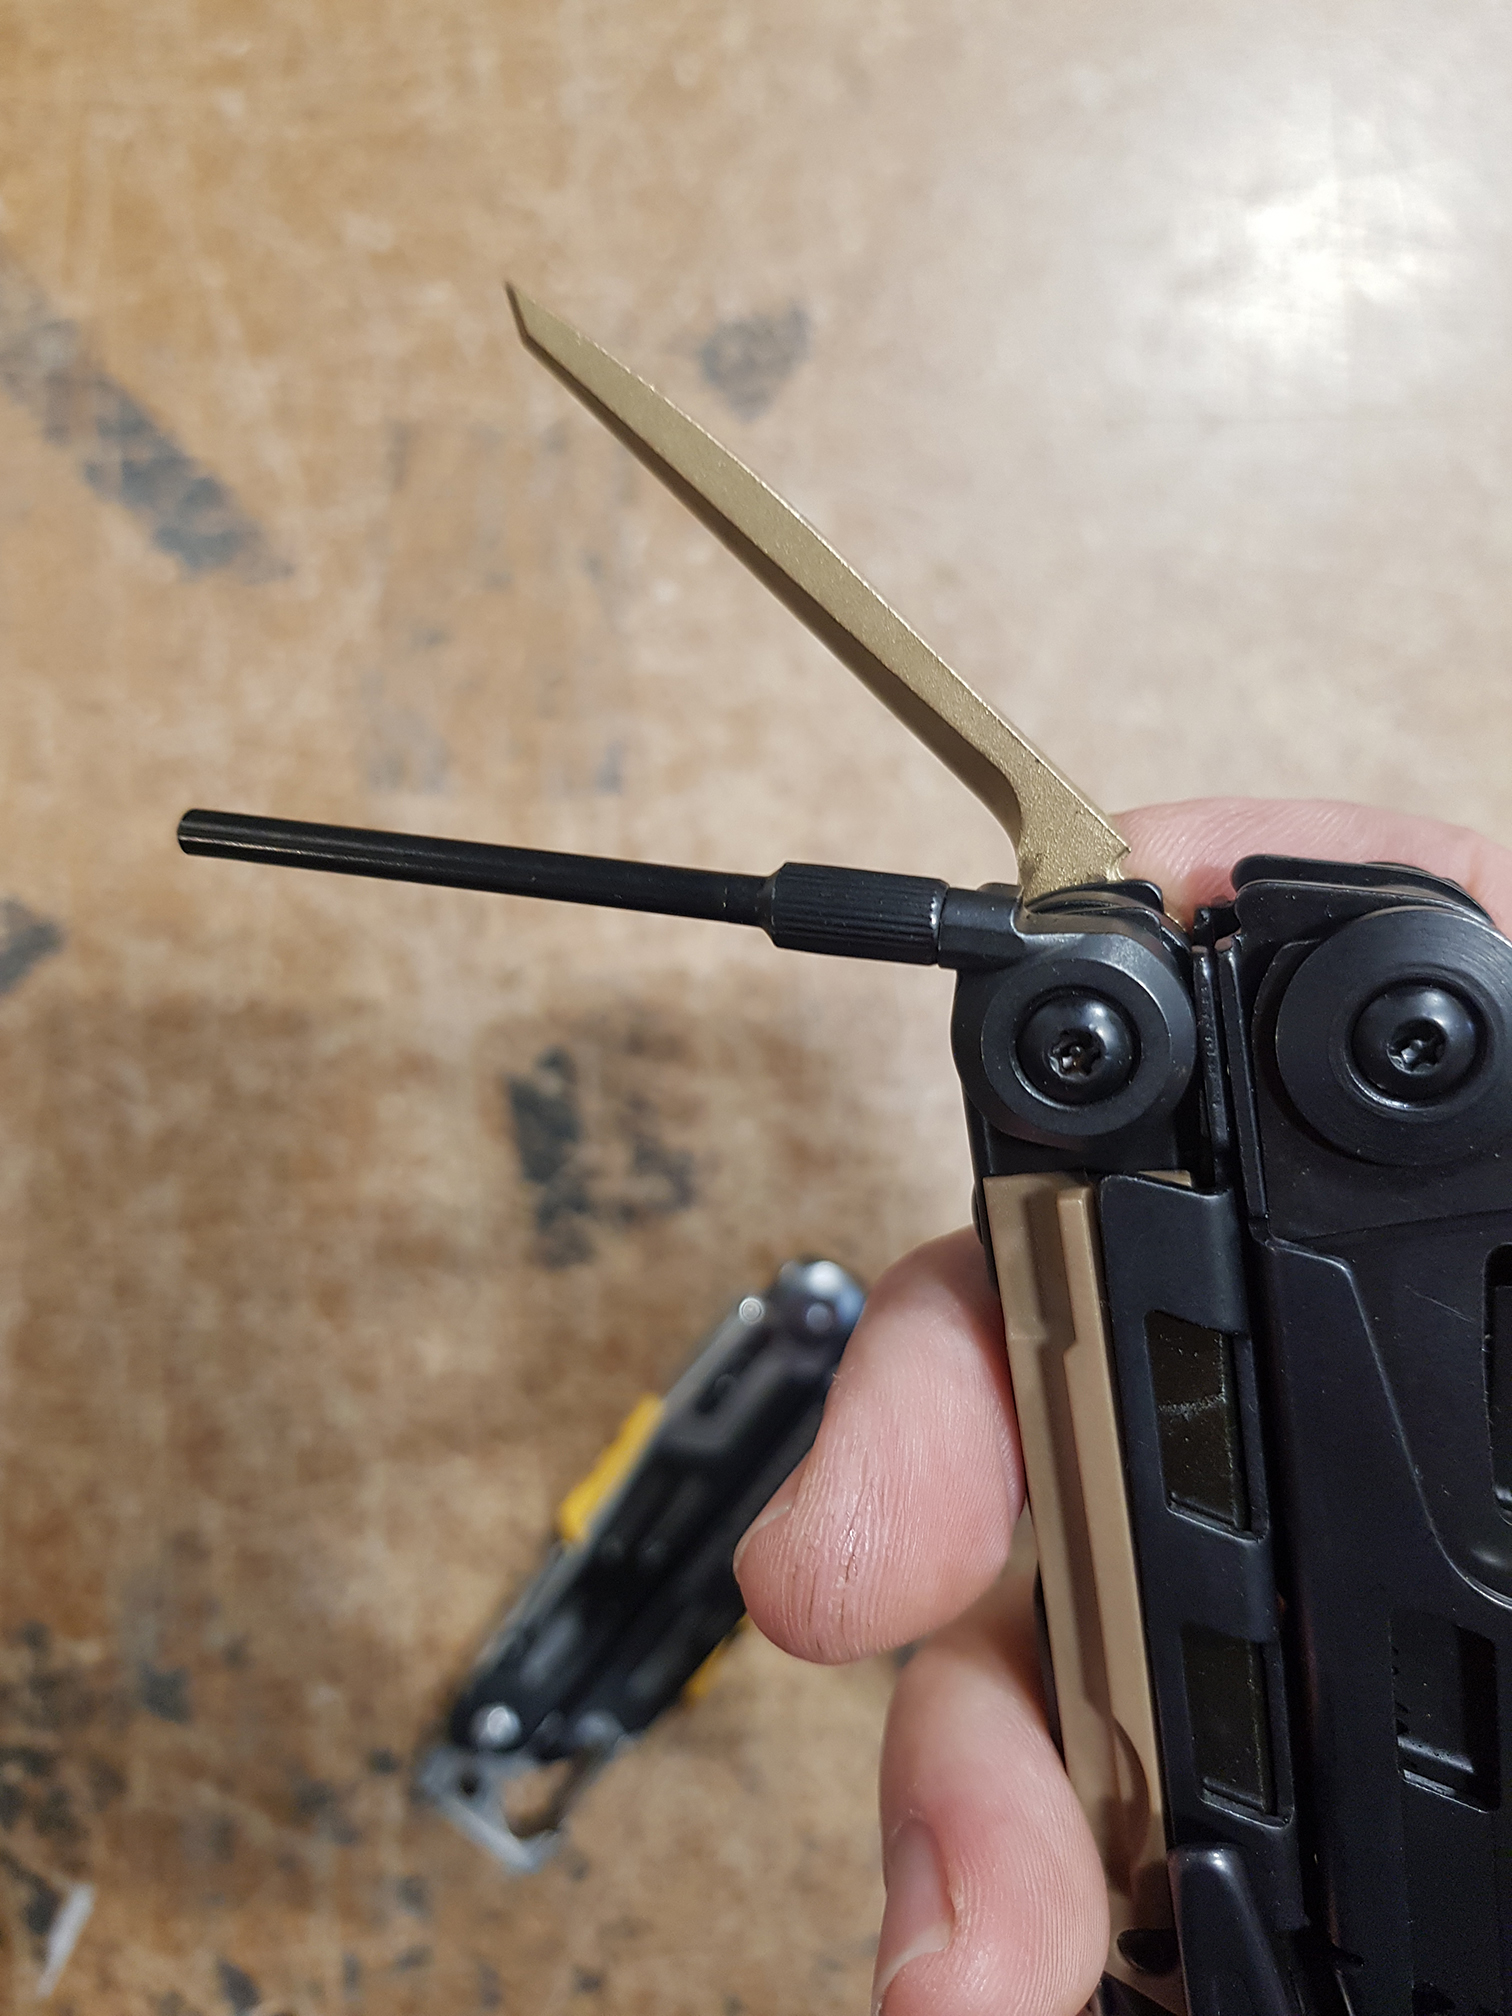 , Spoilt for choice – the Leatherman Signal vs Leatherman MUT